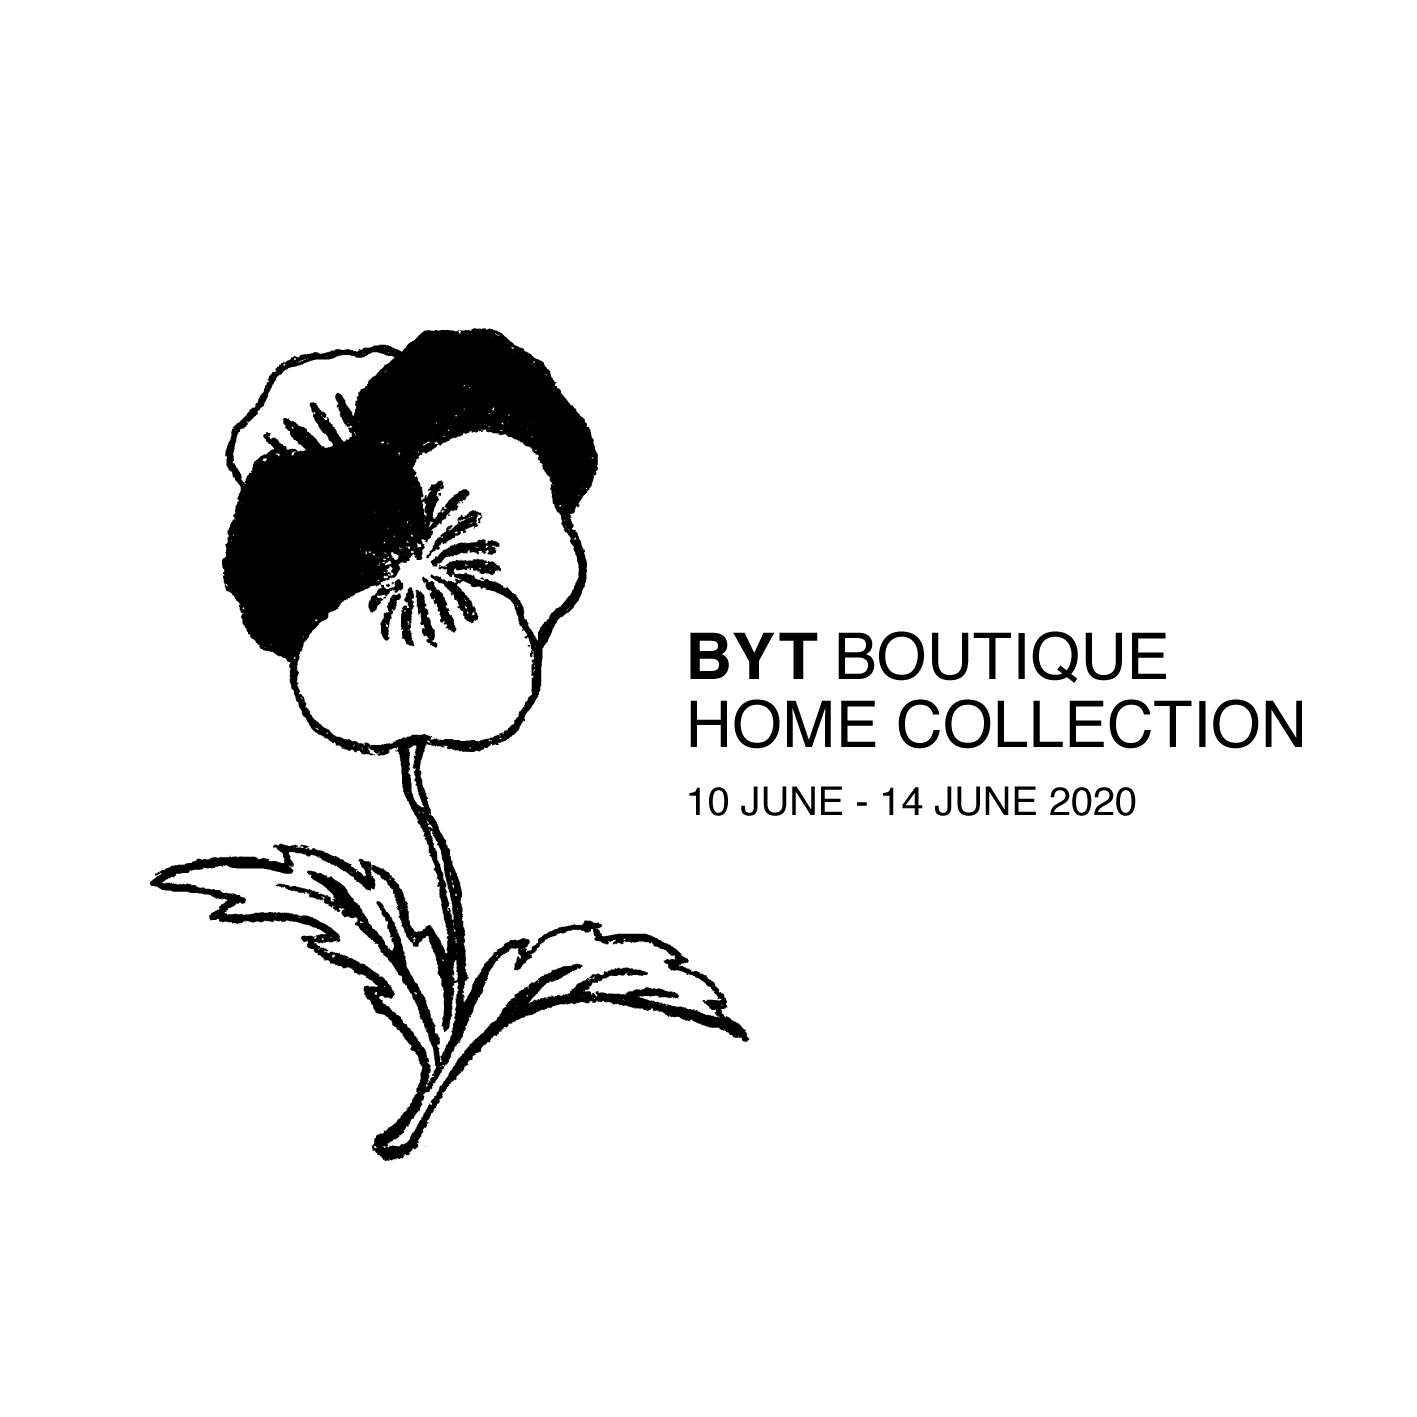 BYT BOUTIQUE "HOME COLLECTION"